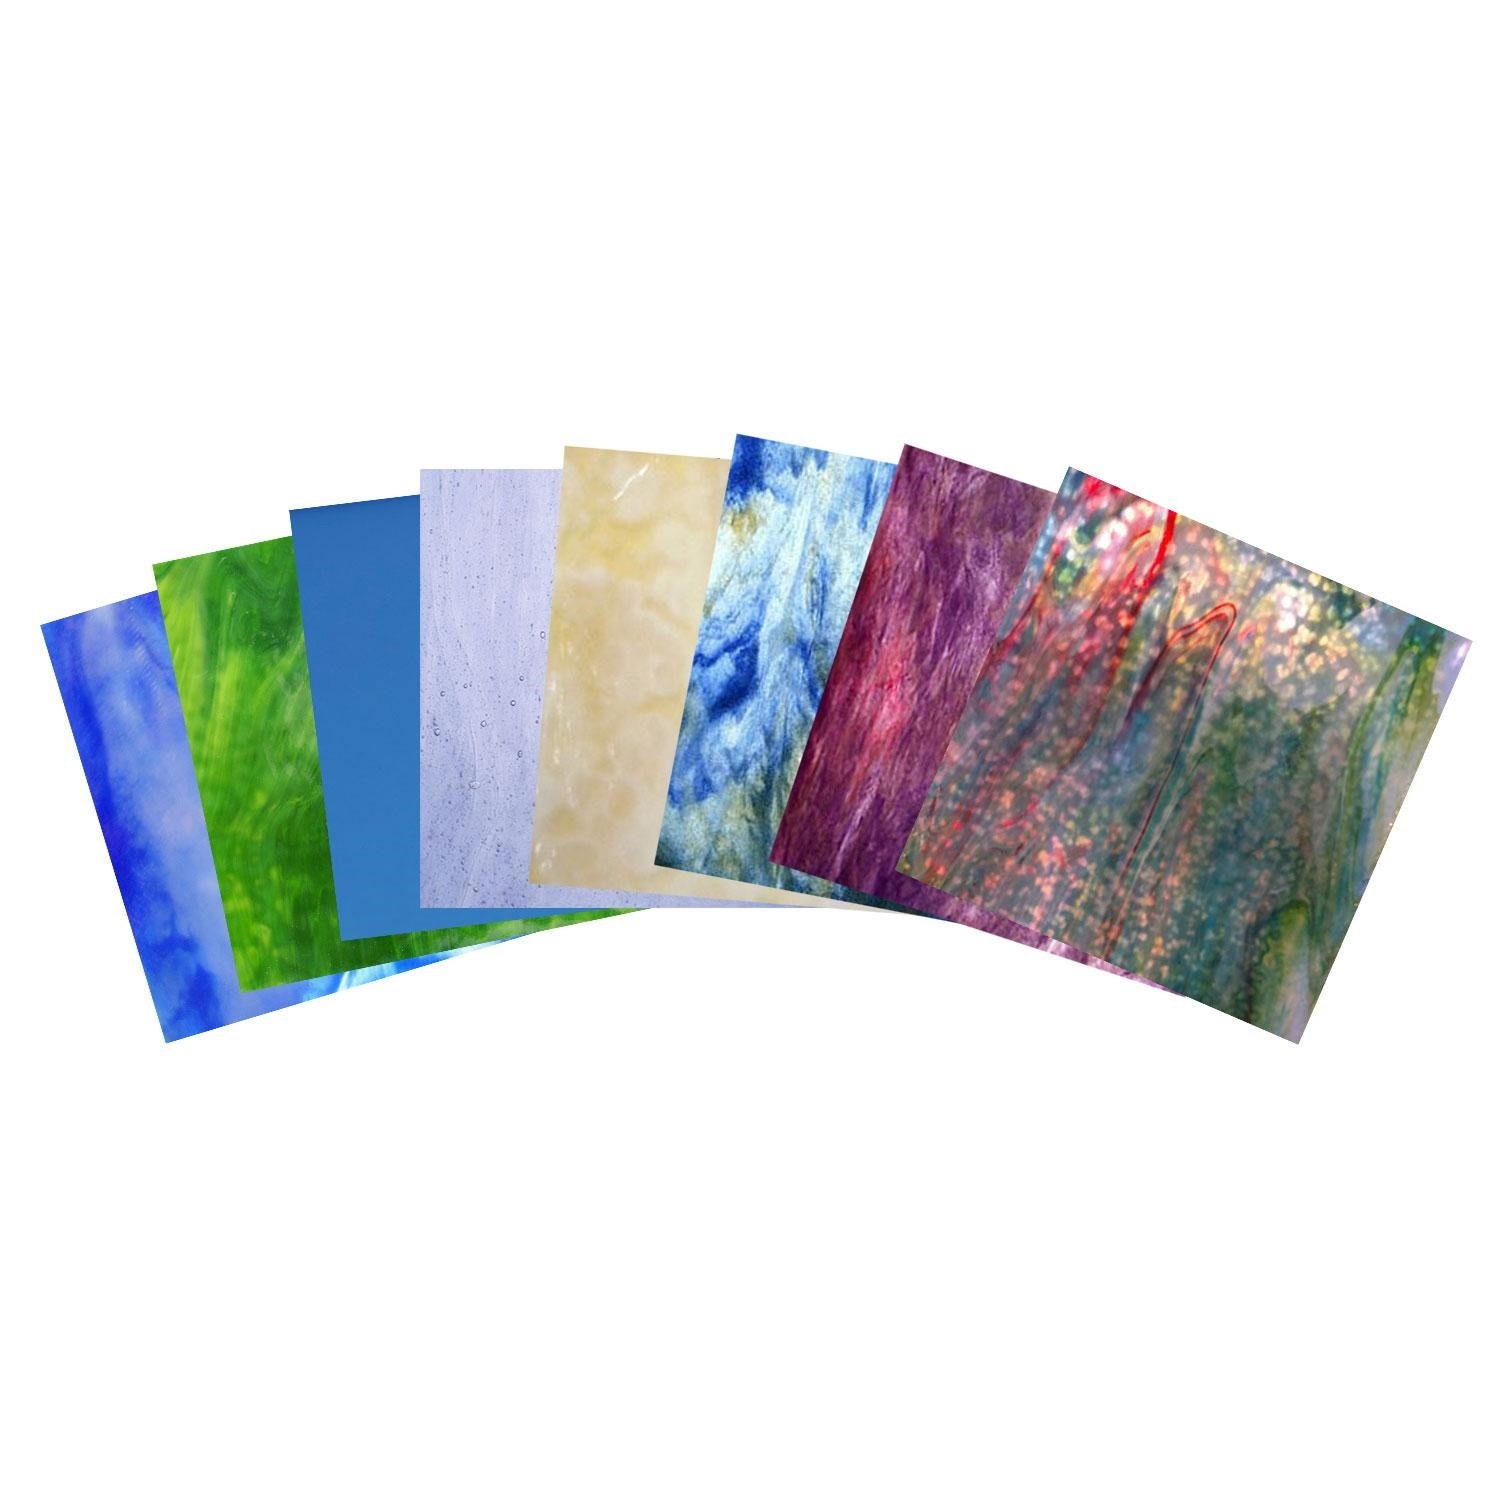 Northern Lights Stained Glass Pack s8275 - The Avenue Stained Glass